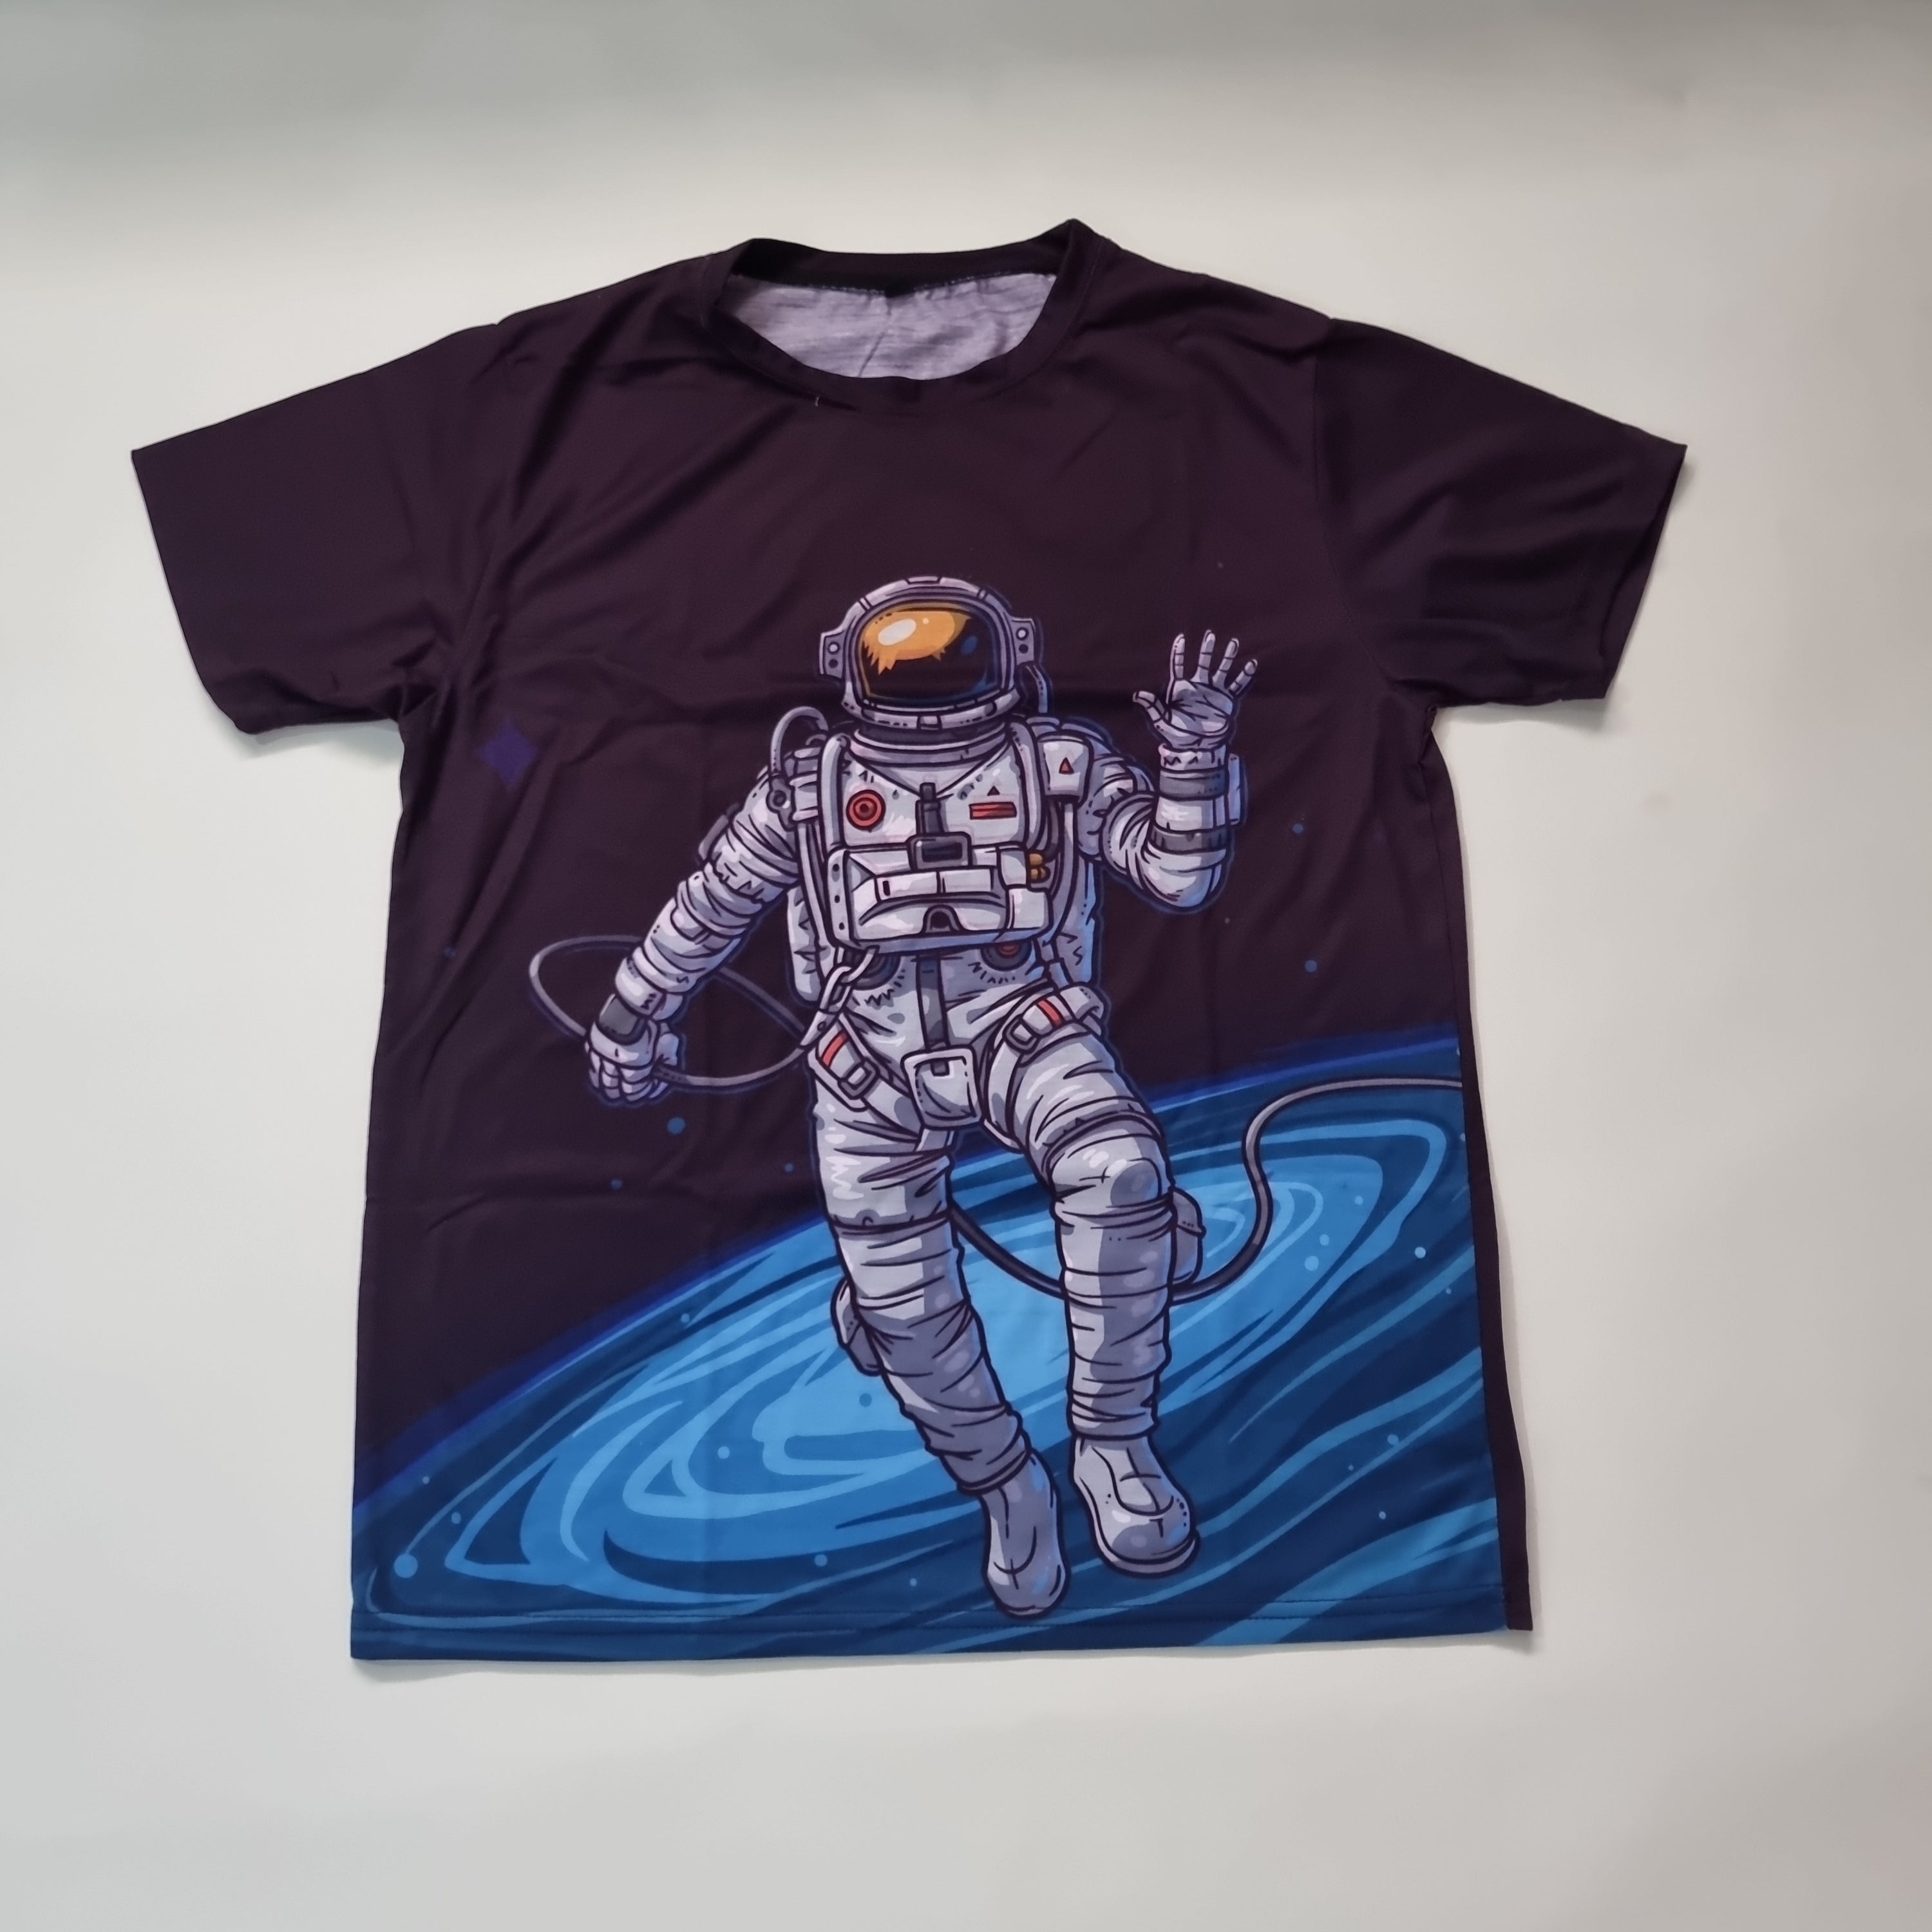 All over space tee